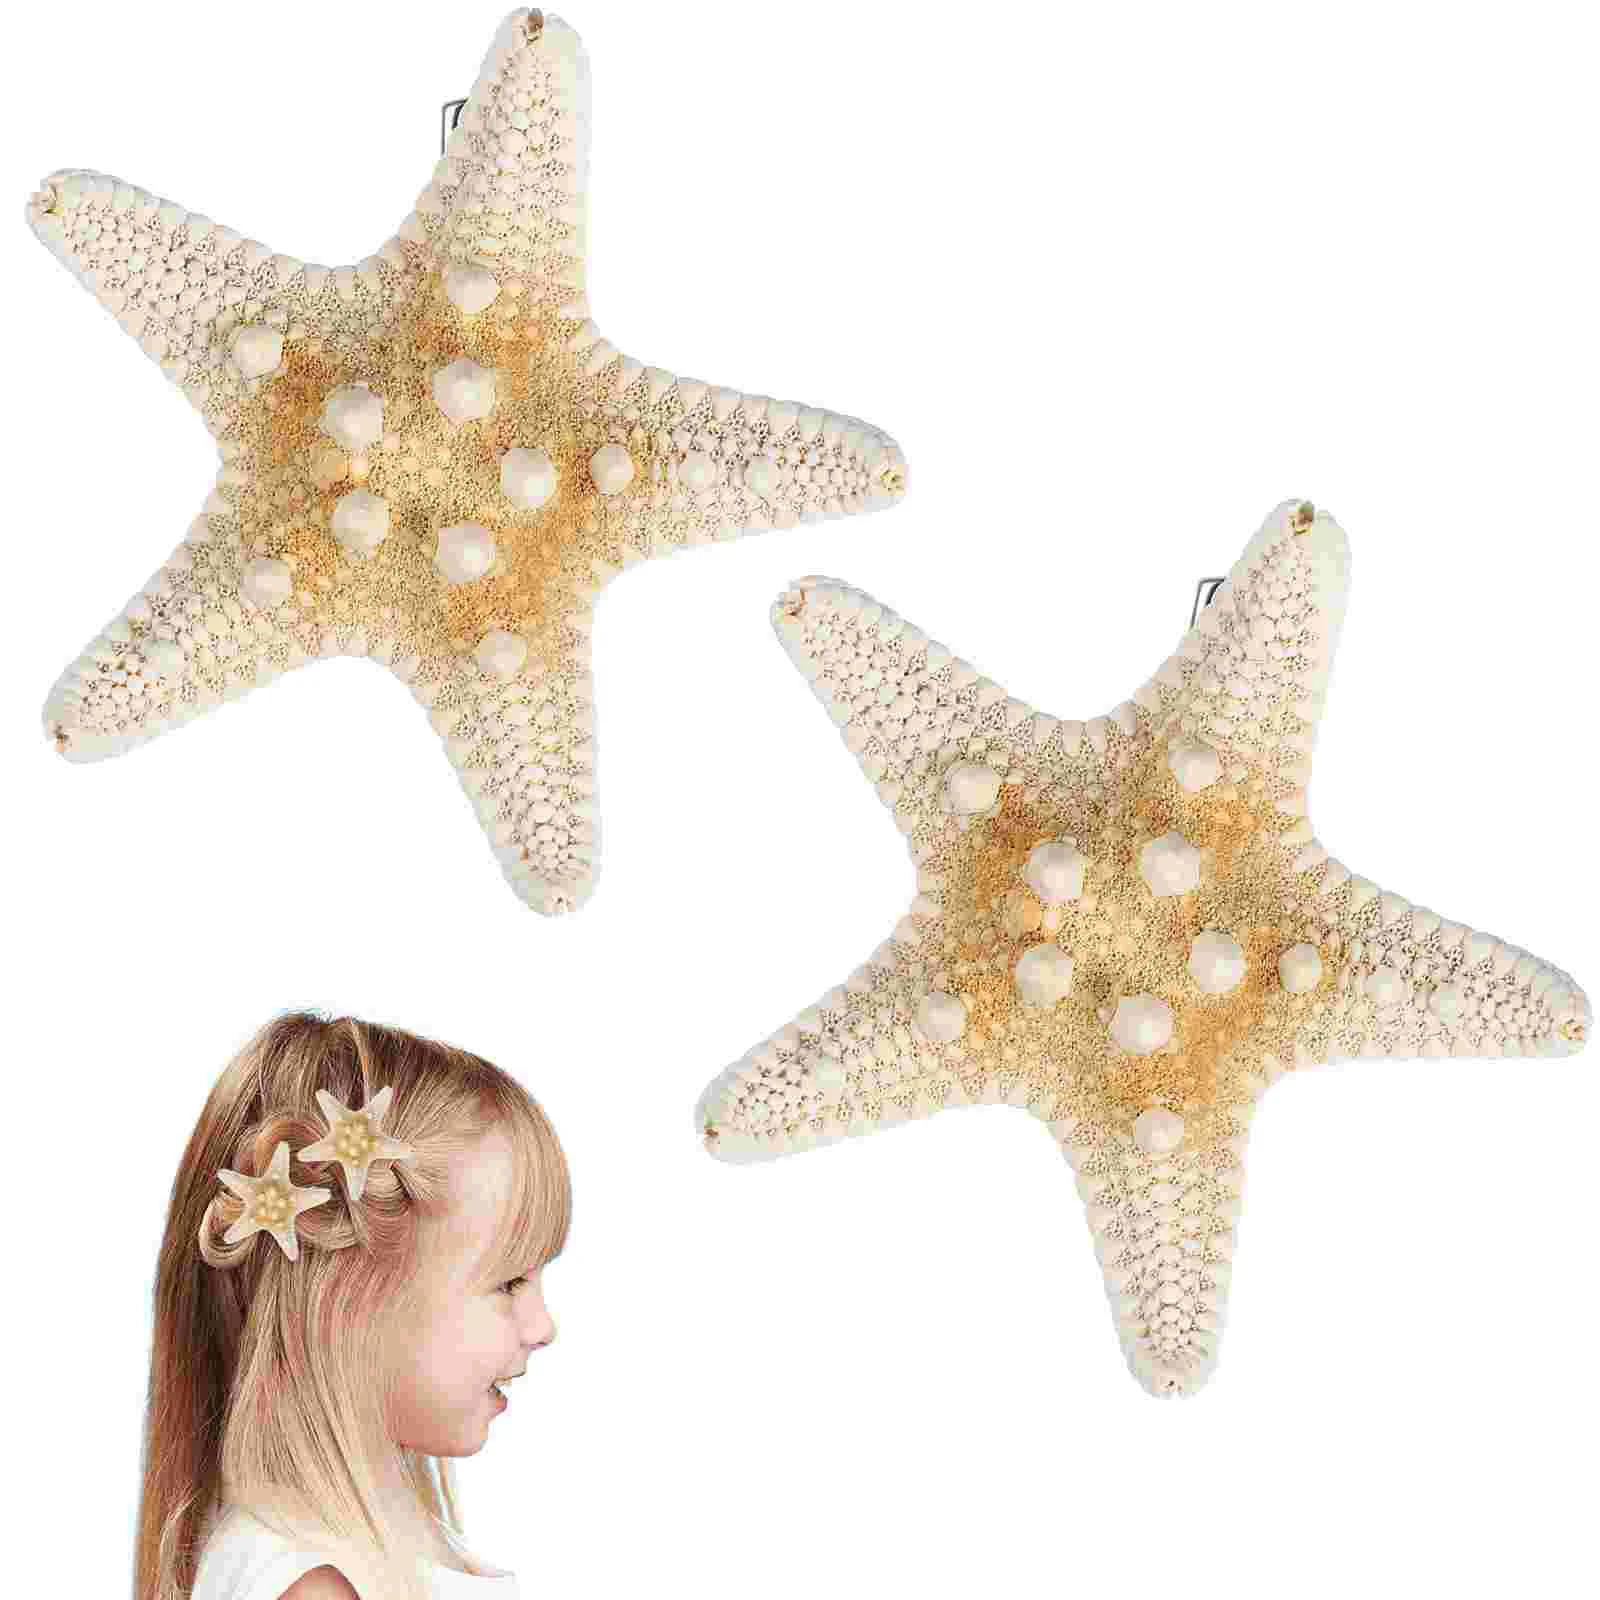 2 Pcs Frcolor Handmade Natural Starfish Girl Hair Accessories 2pcs/pack on Bangs for Women Thick Curl Girls Pins Miss 2pcs lot newborn hair bow snap bb clips fully wapped for girl toddler hair clip in fringe bangs baby hair accessories barrettes